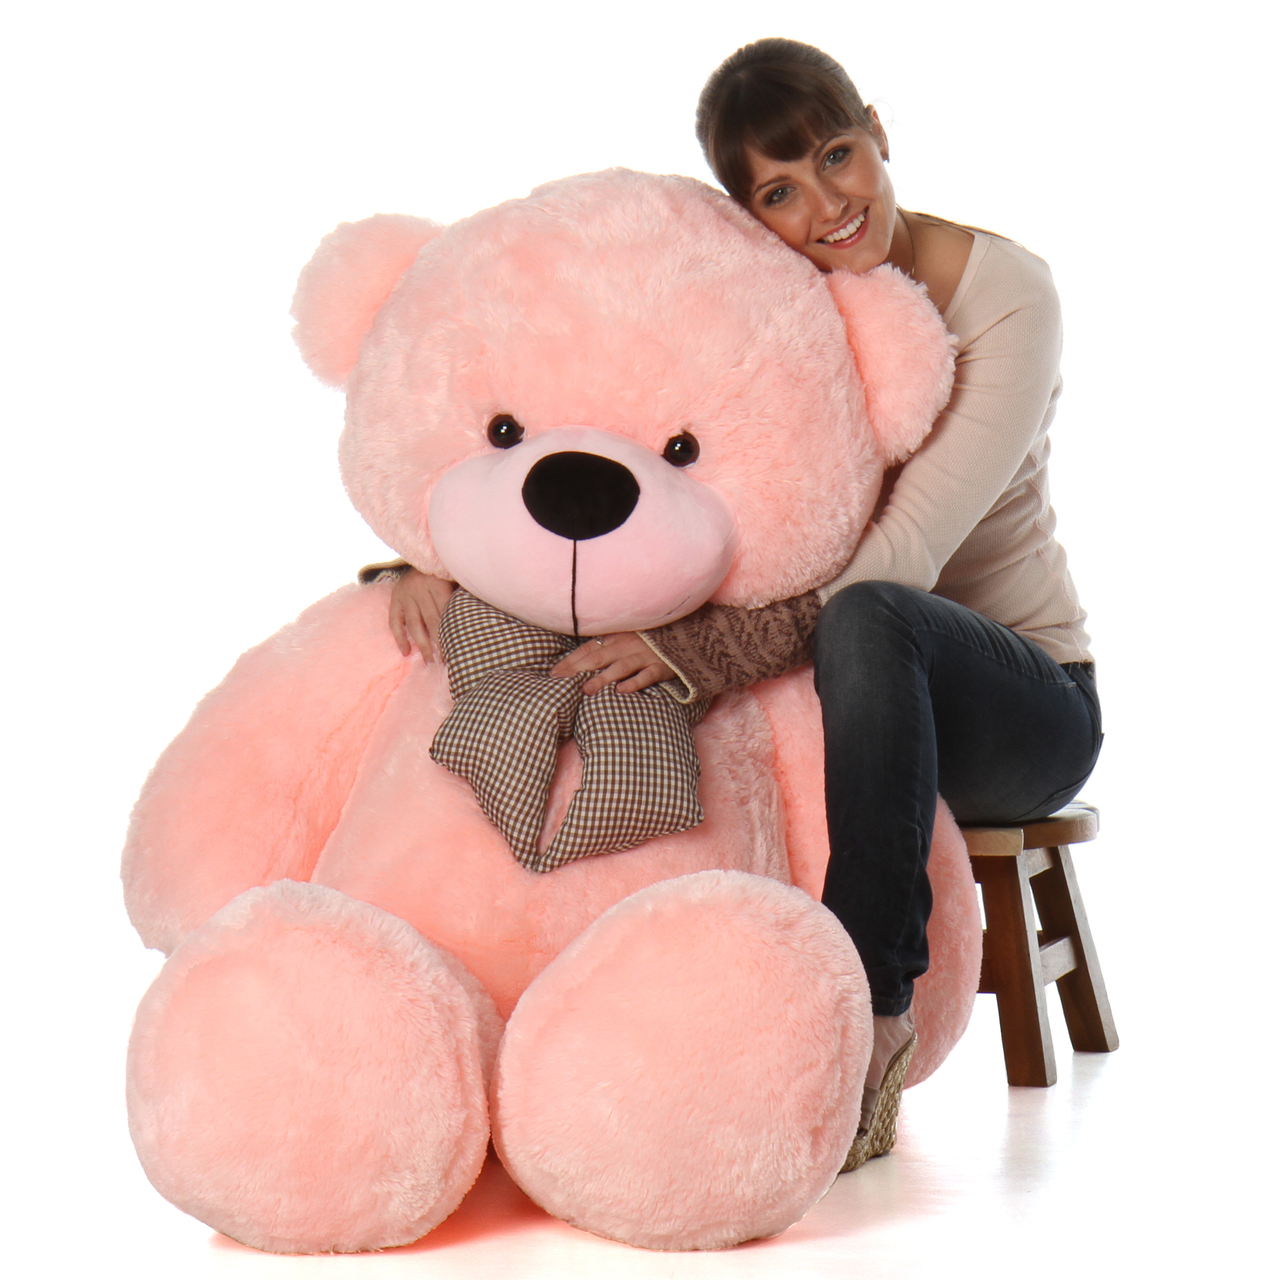 giant pink teddy